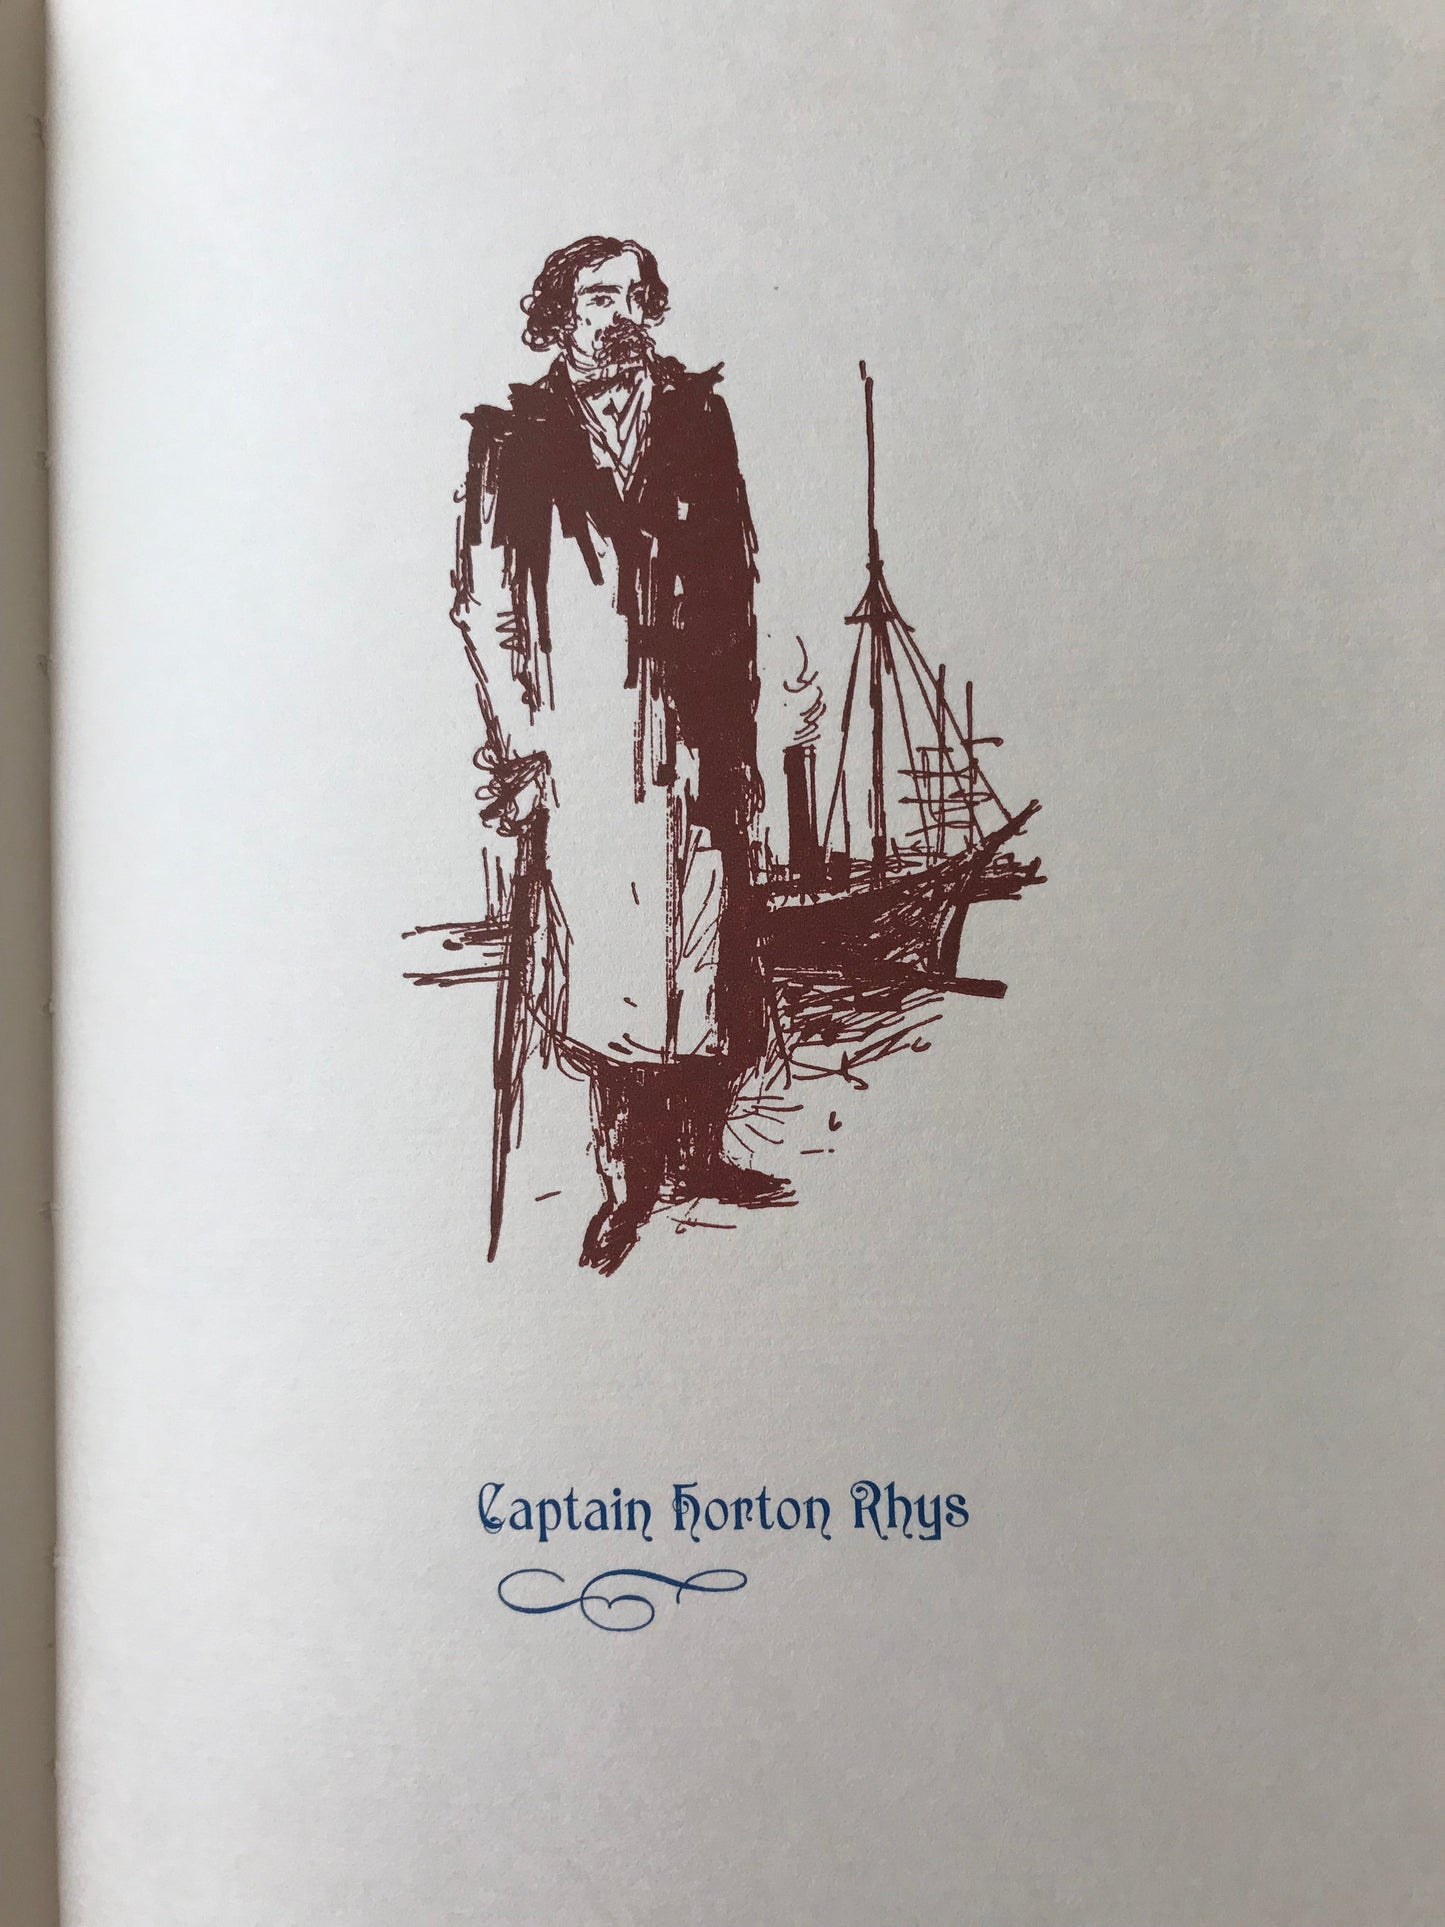 A THEATRICAL TRIP FOR A WAGER !  - CAPTAIN HORTON RHYS BooksCardsNBikes